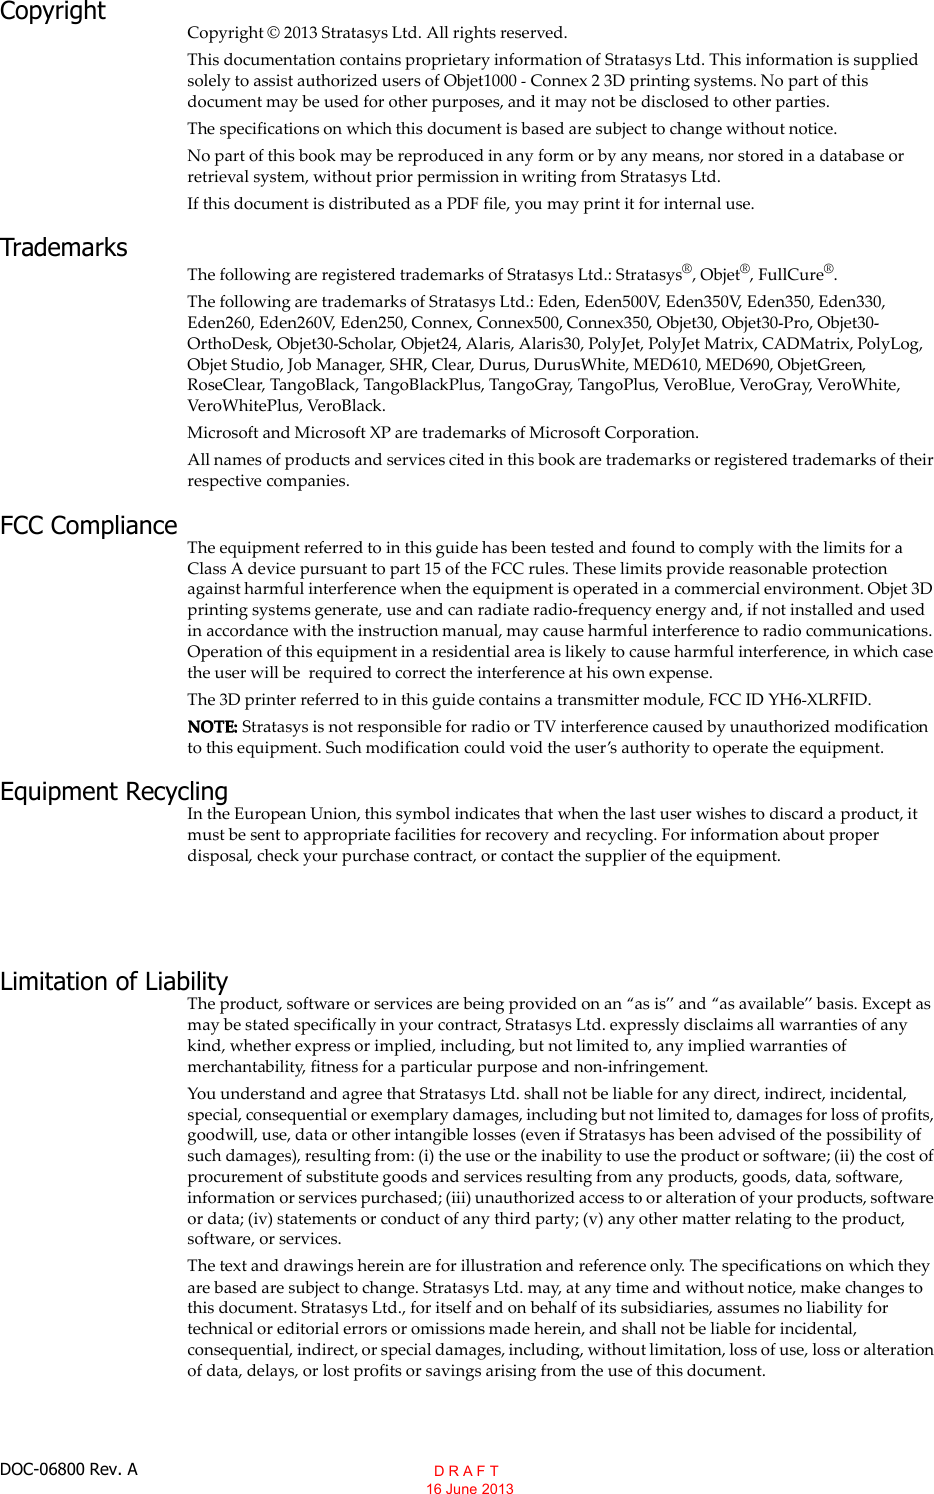 DOC-06800 Rev. ACopyrightCopyright © 2013 Stratasys Ltd. All rights reserved.This documentation contains proprietary information of Stratasys Ltd. This information is suppliedsolely to assist authorized users of Objet1000 Connex 2 3D printing systems. No part of thisdocument may be used for other purposes, and it may not be disclosed to other parties.The specifications on which this document is based are subject to change without notice.No part of this book may be reproduced in any form or by any means, nor stored in a database orretrieval system, without prior permission in writing from Stratasys Ltd.If this document is distributed as a PDF file, you may print it for internal use.TrademarksThe following are registered trademarks of Stratasys Ltd.: Stratasys®, Objet®, FullCure®.The following are trademarks of Stratasys Ltd.: Eden, Eden500V, Eden350V, Eden350, Eden330,Eden260, Eden260V, Eden250, Connex, Connex500, Connex350, Objet30, Objet30 Pro, Objet30OrthoDesk, Objet30 Scholar, Objet24, Alaris, Alaris30, PolyJet, PolyJet Matrix, CADMatrix, PolyLog,Objet Studio, Job Manager, SHR, Clear, Durus, DurusWhite, MED610, MED690, ObjetGreen,RoseClear, TangoBlack, TangoBlackPlus, TangoGray, TangoPlus, VeroBlue, VeroGray, VeroWhite,VeroWhitePlus, VeroBlack.Microsoft and Microsoft XP are trademarks of Microsoft Corporation.All names of products and services cited in this book are trademarks or registered trademarks of theirrespective companies.FCC ComplianceThe equipment referred to in this guide has been tested and found to comply with the limits for aClass A device pursuant to part 15 of the FCC rules. These limits provide reasonable protectionagainst harmful interference when the equipment is operated in a commercial environment. Objet 3Dprinting systems generate, use and can radiate radio frequency energy and, if not installed and usedin accordance with the instruction manual, may cause harmful interference to radio communications.Operation of this equipment in a residential area is likely to cause harmful interference, in which casethe user will be required to correct the interference at his own expense.The 3D printer referred to in this guide contains a transmitter module, FCC ID YH6 XLRFID.NOTE: Stratasys is not responsible for radio or TV interference caused by unauthorized modificationto this equipment. Such modification could void the users authority to operate the equipment.Equipment RecyclingIn the European Union, this symbol indicates that when the last user wishes to discard a product, itmust be sent to appropriate facilities for recovery and recycling. For information about properdisposal, check your purchase contract, or contact the supplier of the equipment.Limitation of LiabilityThe product, software or services are being provided on an as is and as available basis. Except asmay be stated specifically in your contract, Stratasys Ltd. expressly disclaims all warranties of anykind, whether express or implied, including, but not limited to, any implied warranties ofmerchantability, fitness for a particular purpose and non infringement.You understand and agree that Stratasys Ltd. shall not be liable for any direct, indirect, incidental,special, consequential or exemplary damages, including but not limited to, damages for loss of profits,goodwill, use, data or other intangible losses (even if Stratasys has been advised of the possibility ofsuch damages), resulting from: (i) the use or the inability to use the product or software; (ii) the cost ofprocurement of substitute goods and services resulting from any products, goods, data, software,information or services purchased; (iii) unauthorized access to or alteration of your products, softwareor data; (iv) statements or conduct of any third party; (v) any other matter relating to the product,software, or services.The text and drawings herein are for illustration and reference only. The specifications on which theyare based are subject to change. Stratasys Ltd. may, at any time and without notice, make changes tothis document. Stratasys Ltd., for itself and on behalf of its subsidiaries, assumes no liability fortechnical or editorial errors or omissions made herein, and shall not be liable for incidental,consequential, indirect, or special damages, including, without limitation, loss of use, loss or alterationof data, delays, or lost profits or savings arising from the use of this document.  D R A F T 16 June 2013